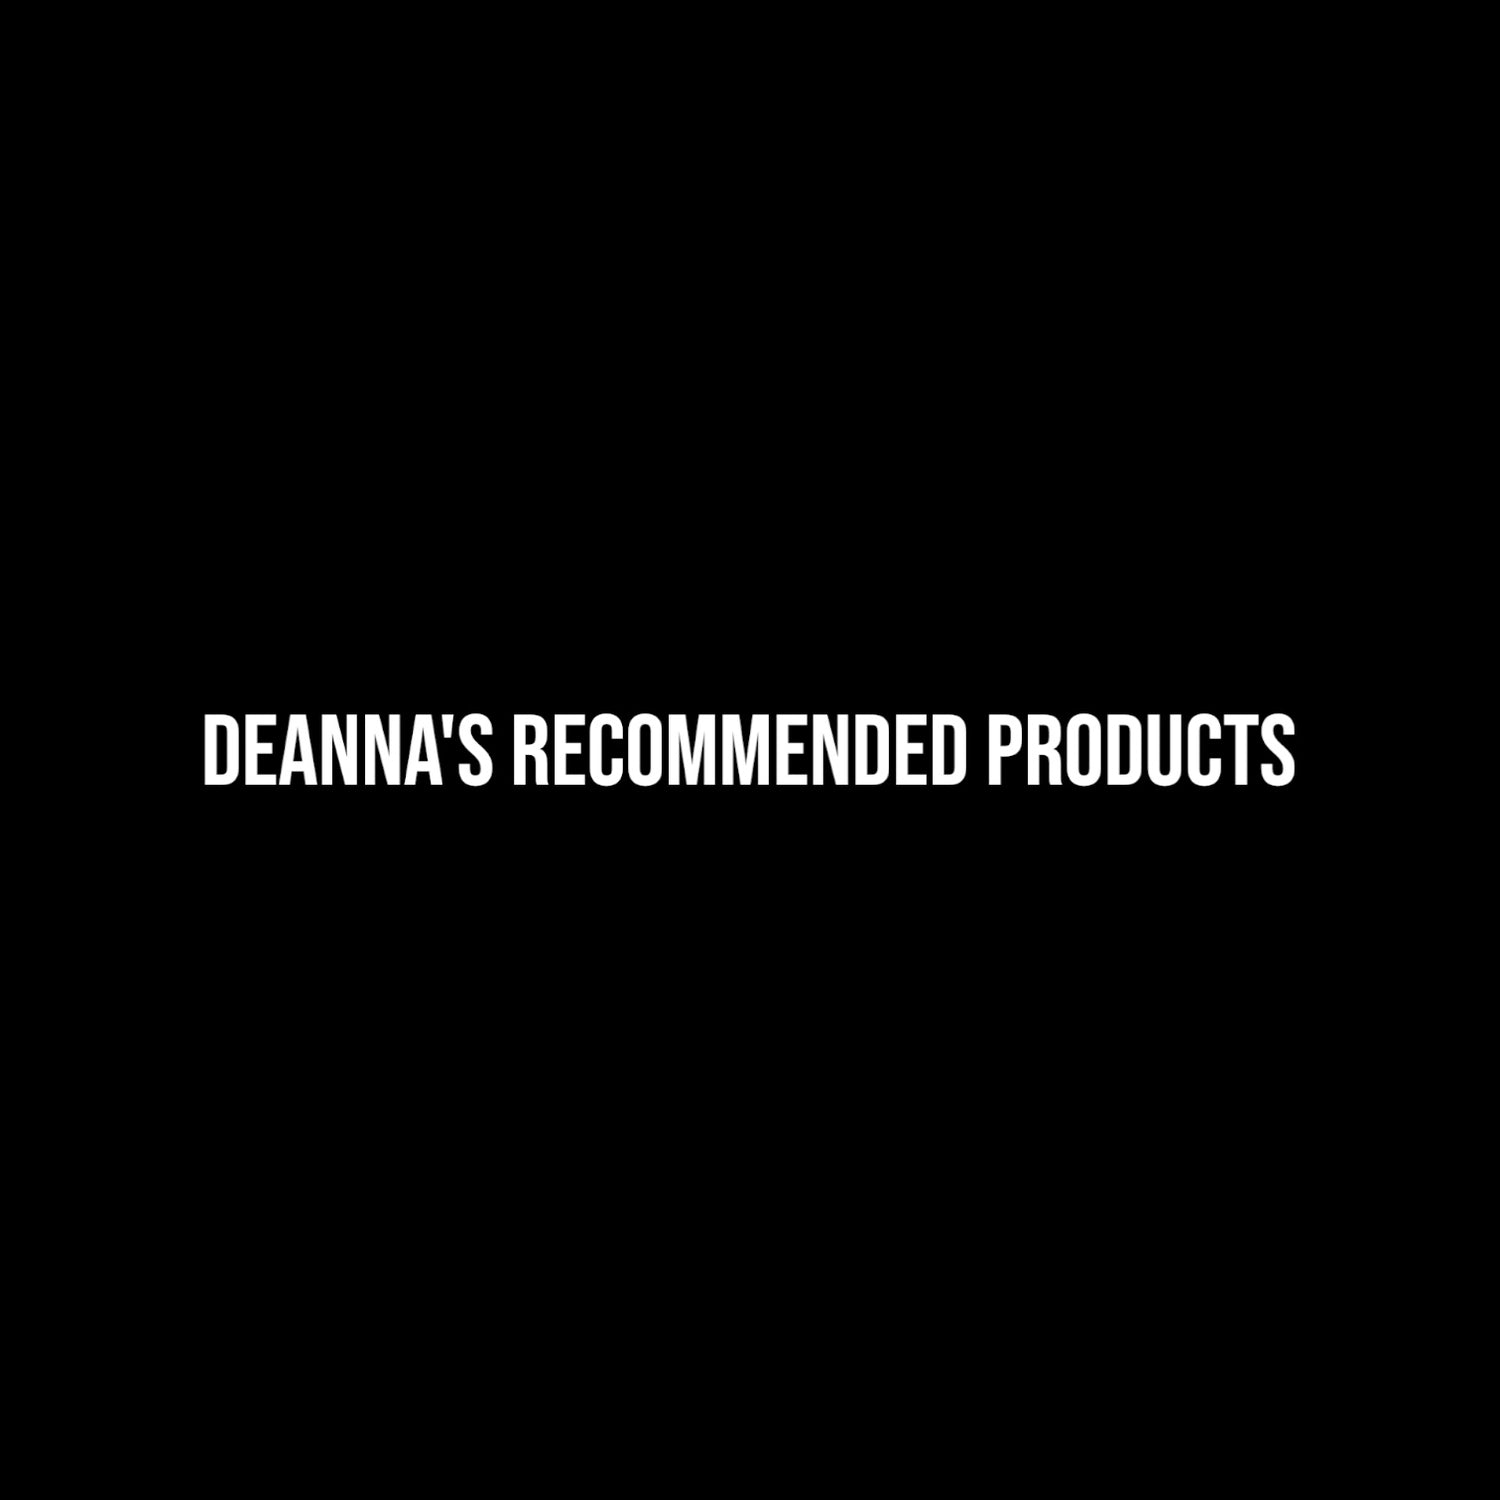 Deanna's Recommended Products